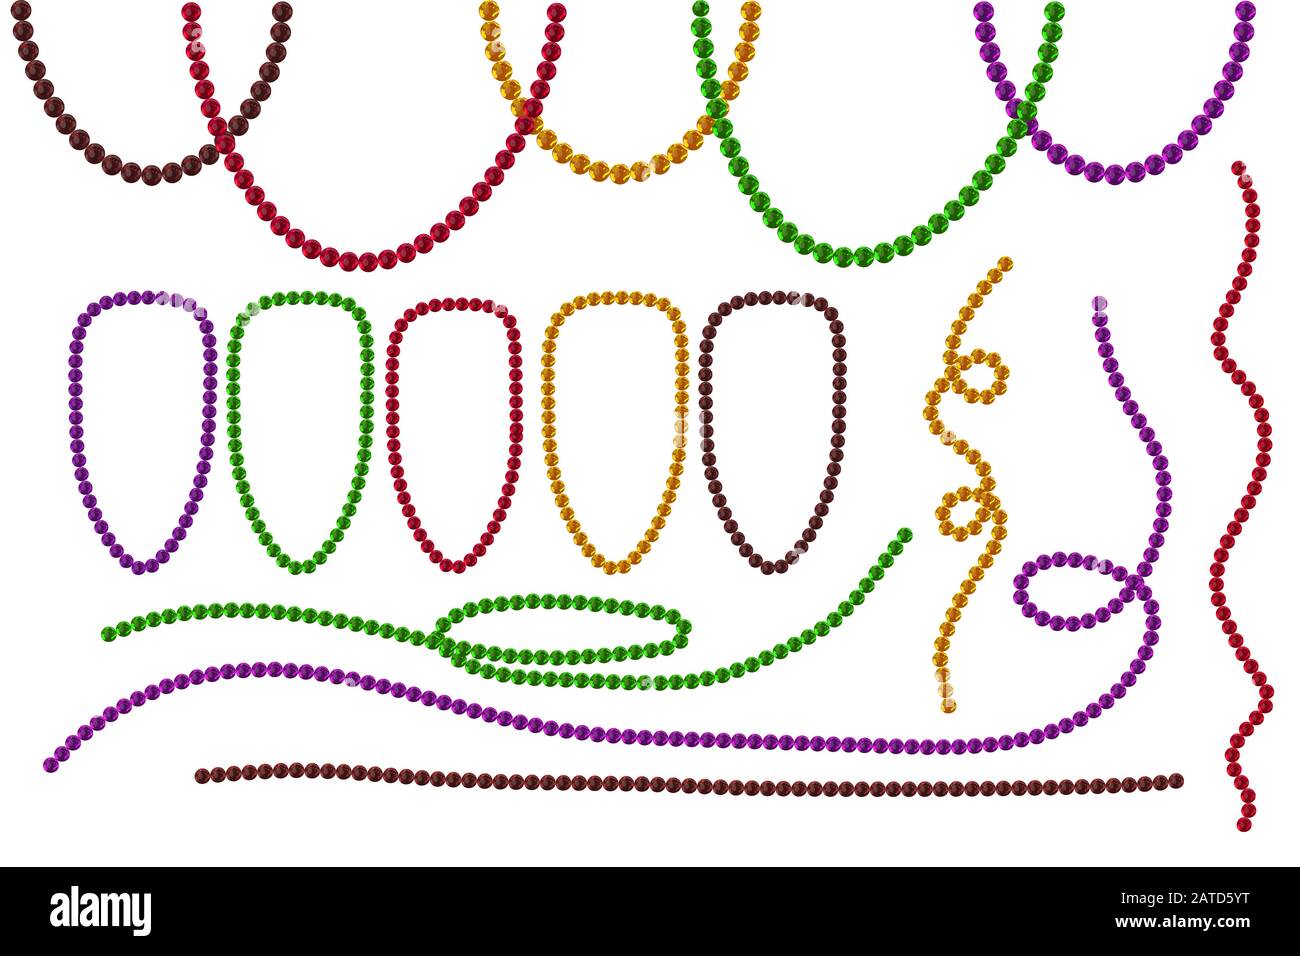 Mardi Gras beads isolated on white background. Mardi Gras beads in traditional colors. Decorative glossy realistic elements. Stock vector illustration Stock Vector